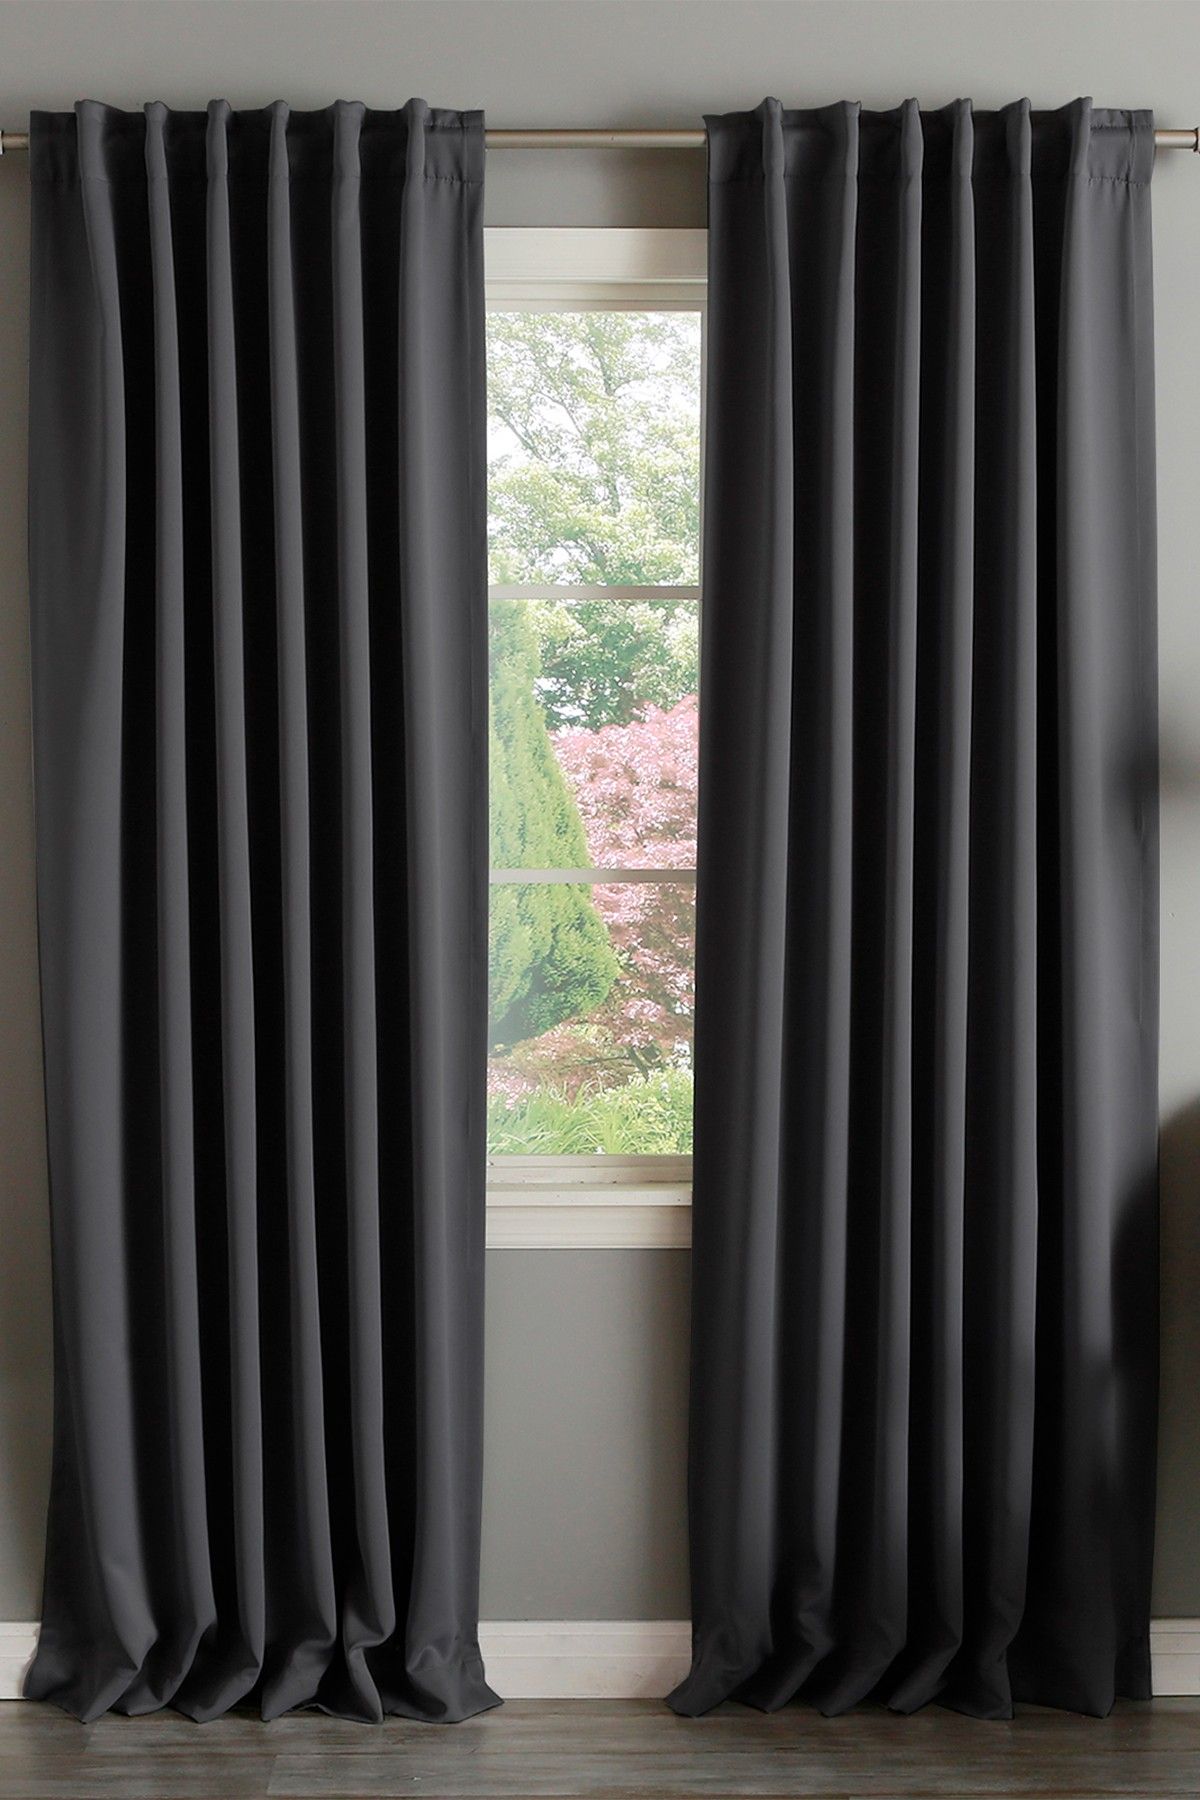 Grey Curtains: Add Sophistication and Elegance to Your Space